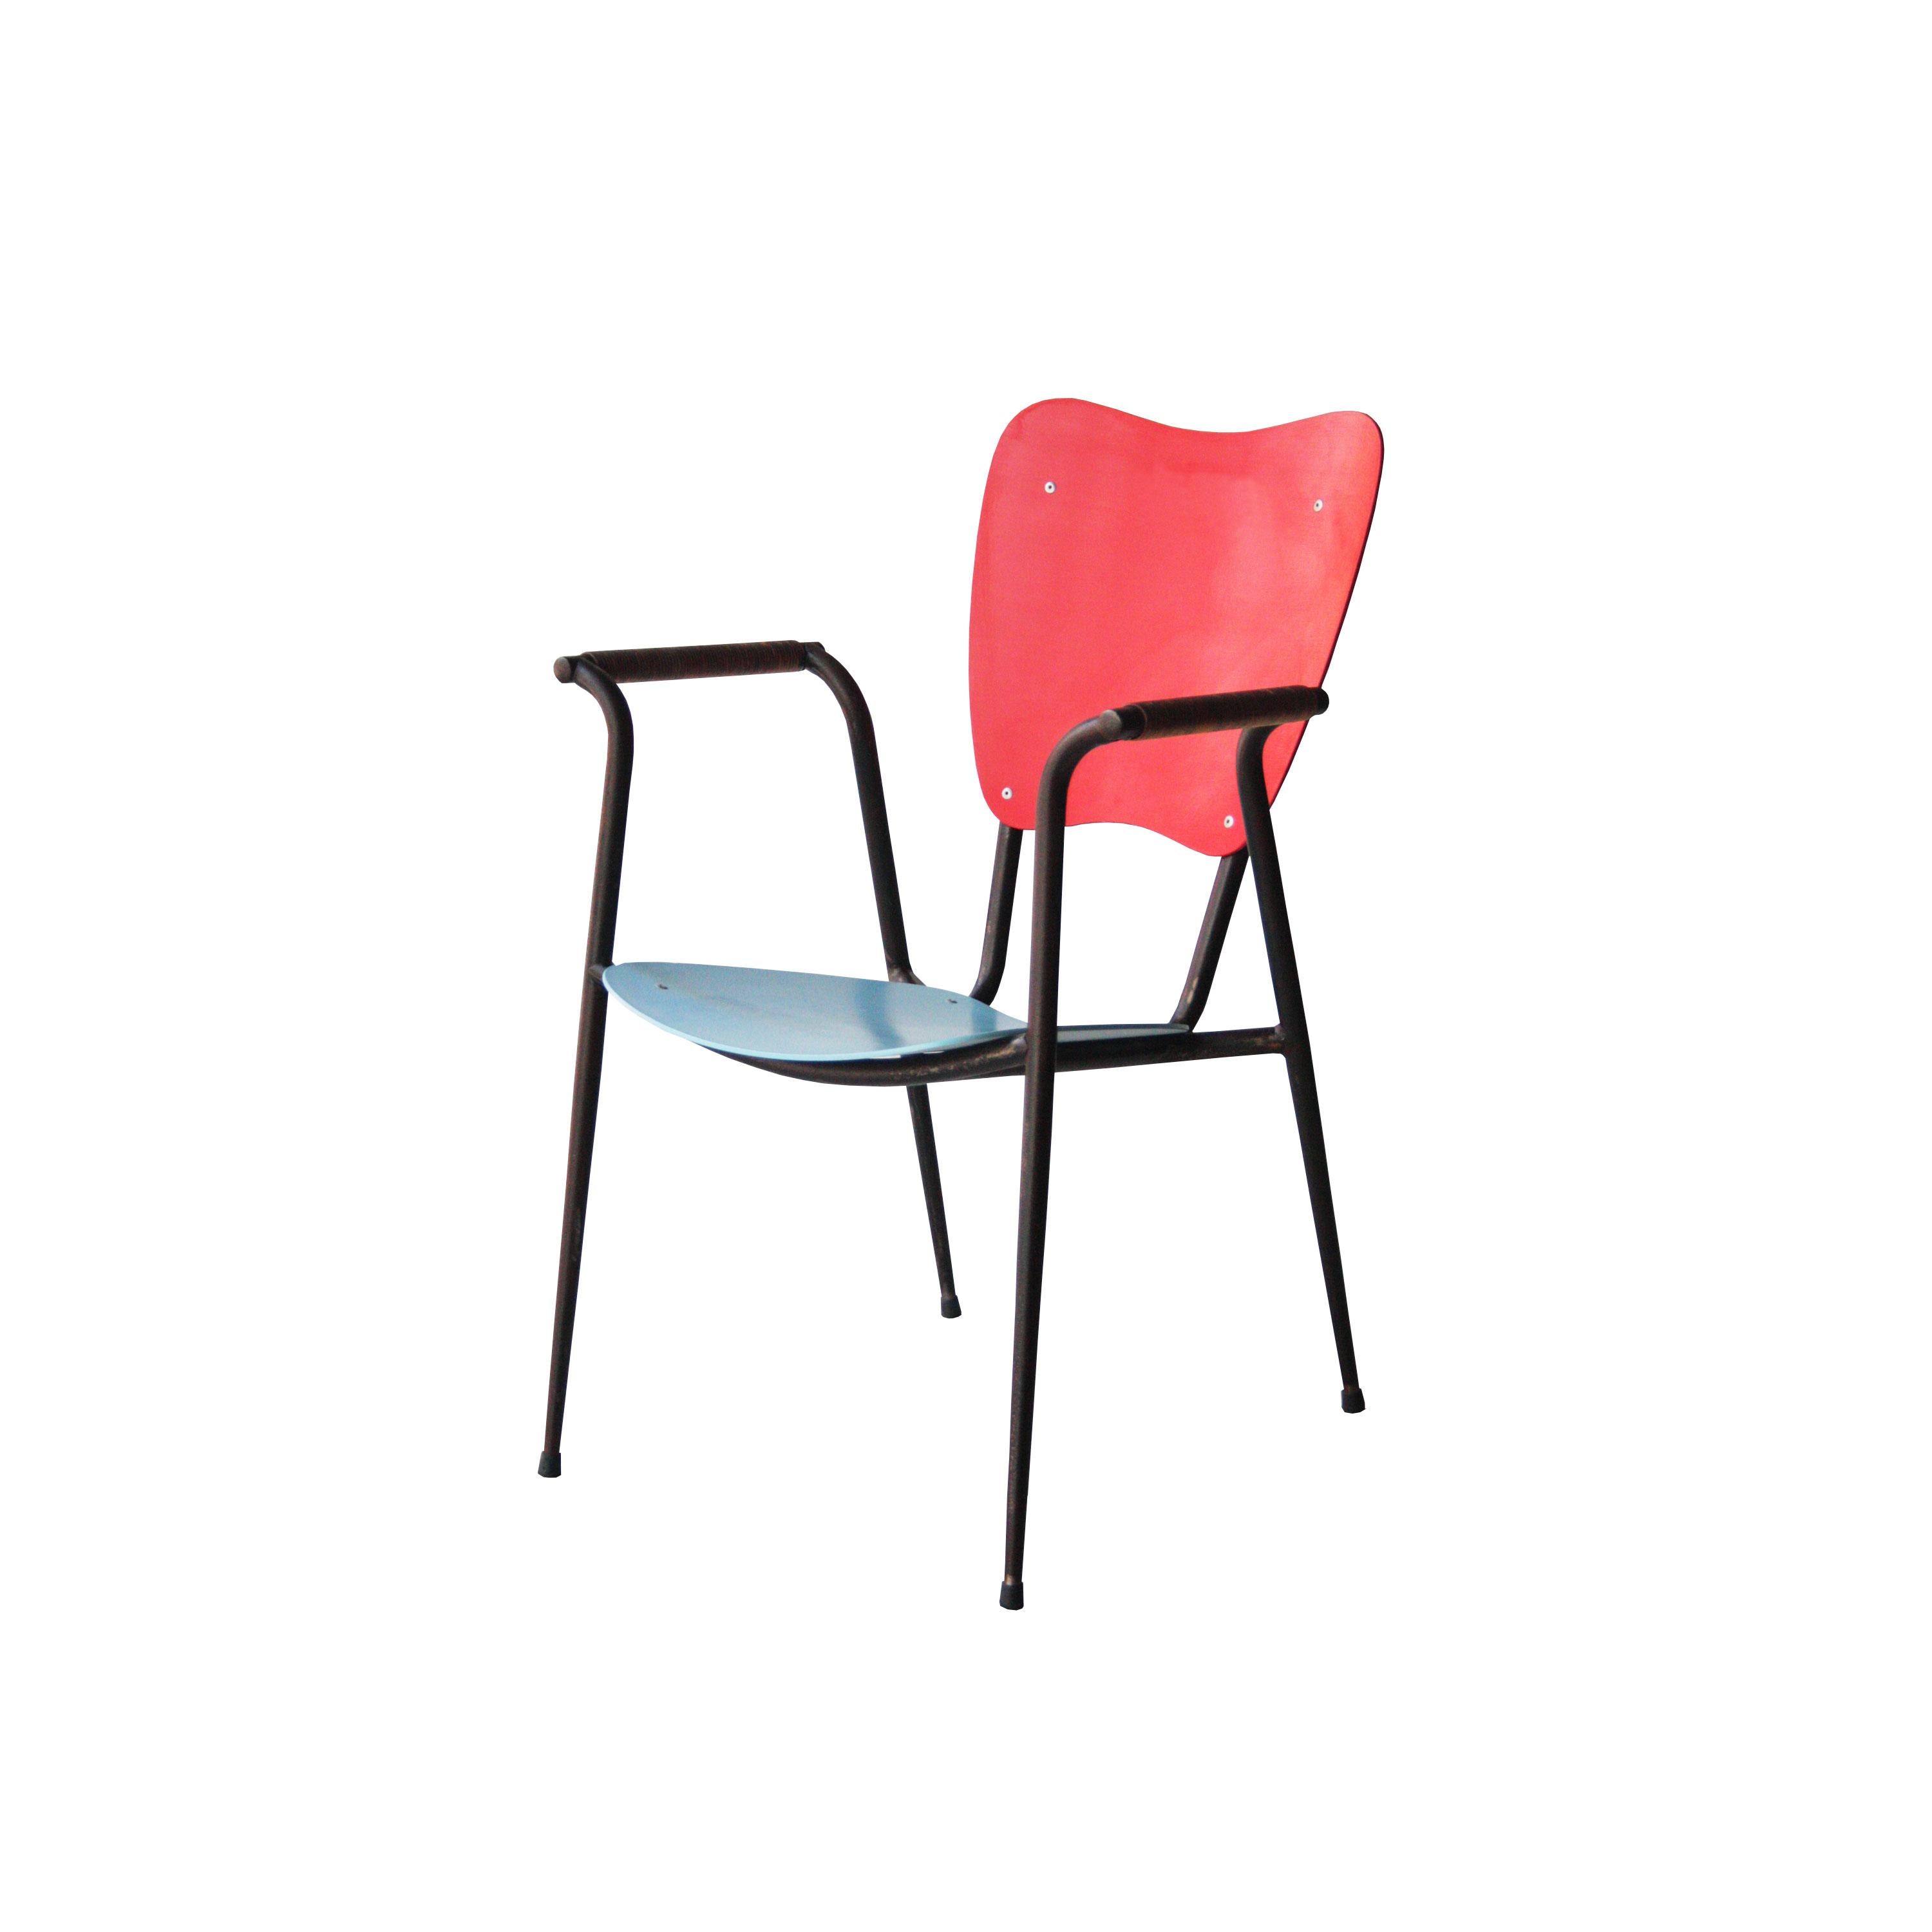 Set of four chairs designed by Doro Cundo with black lacquered metal structure, arms with natural fiber and seat and back in lacquered wood in blue and red.